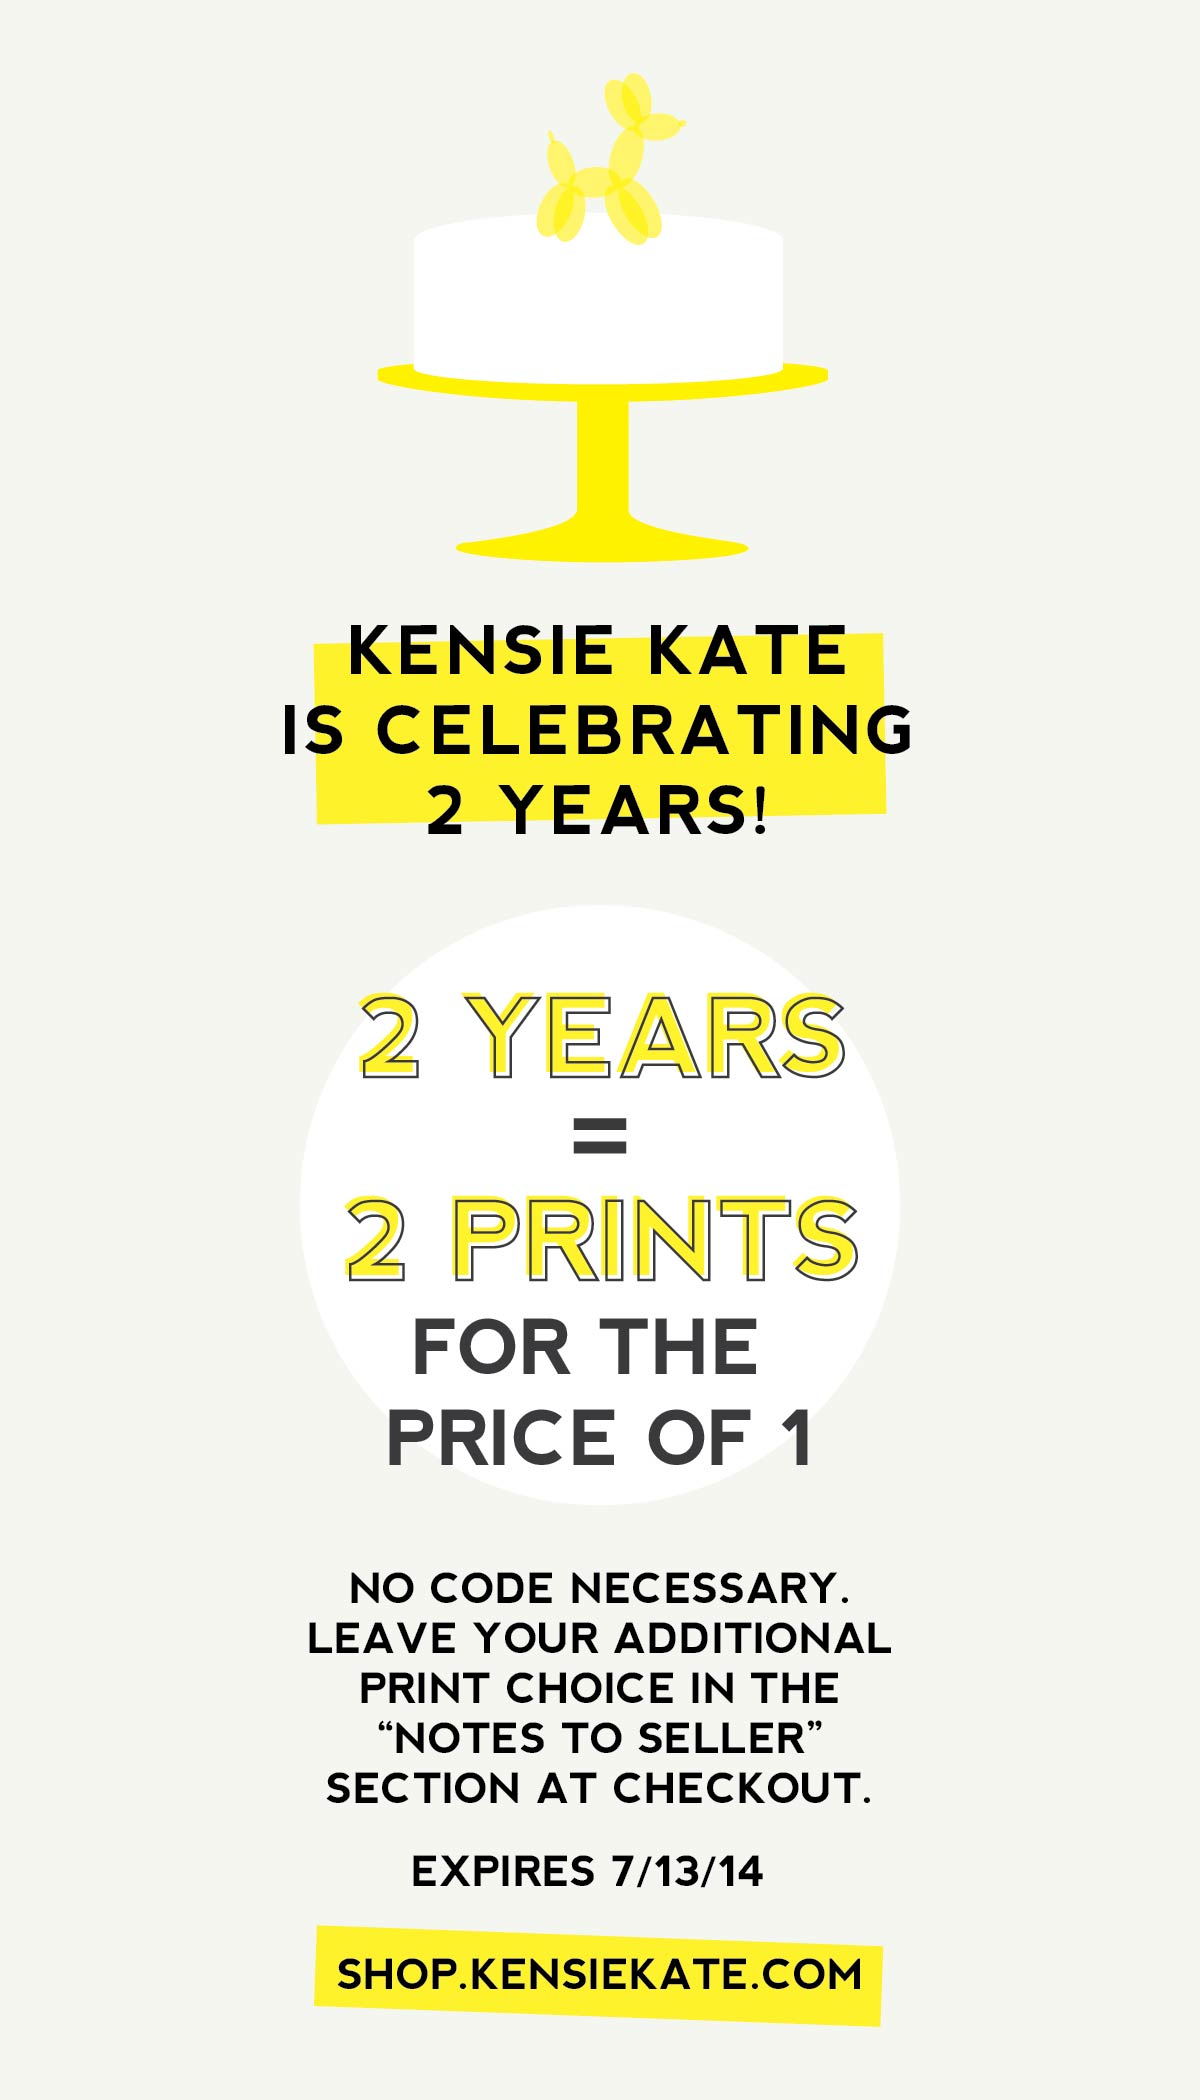 kensie kate 2 year anniversary sale | free print with every print you order through 7/13/14